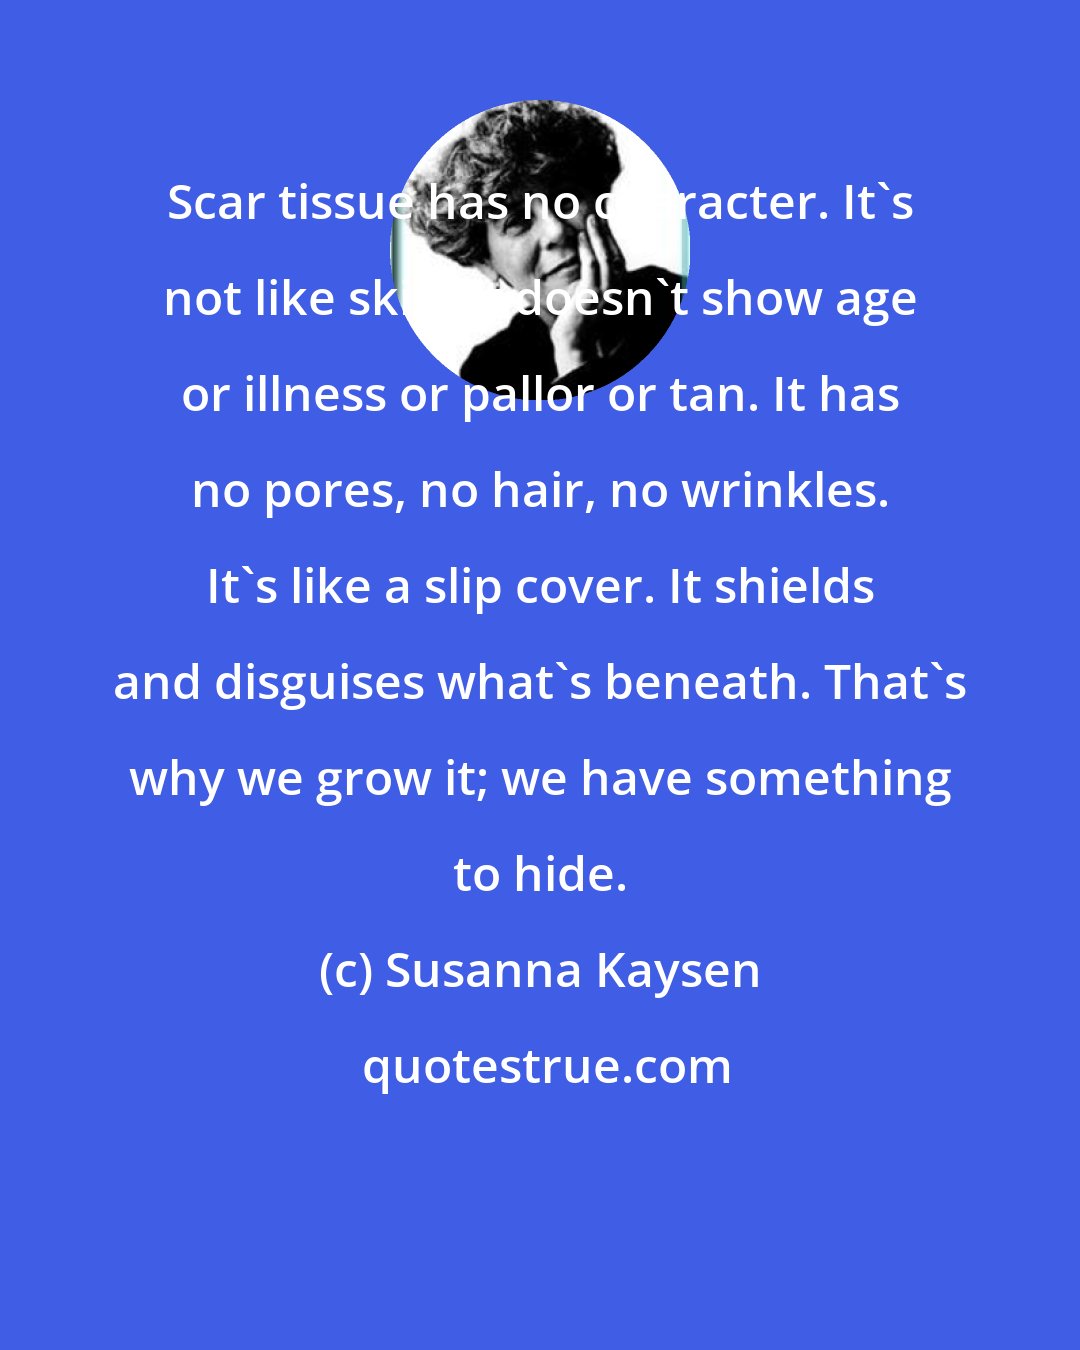 Susanna Kaysen: Scar tissue has no character. It's not like skin. It doesn't show age or illness or pallor or tan. It has no pores, no hair, no wrinkles. It's like a slip cover. It shields and disguises what's beneath. That's why we grow it; we have something to hide.